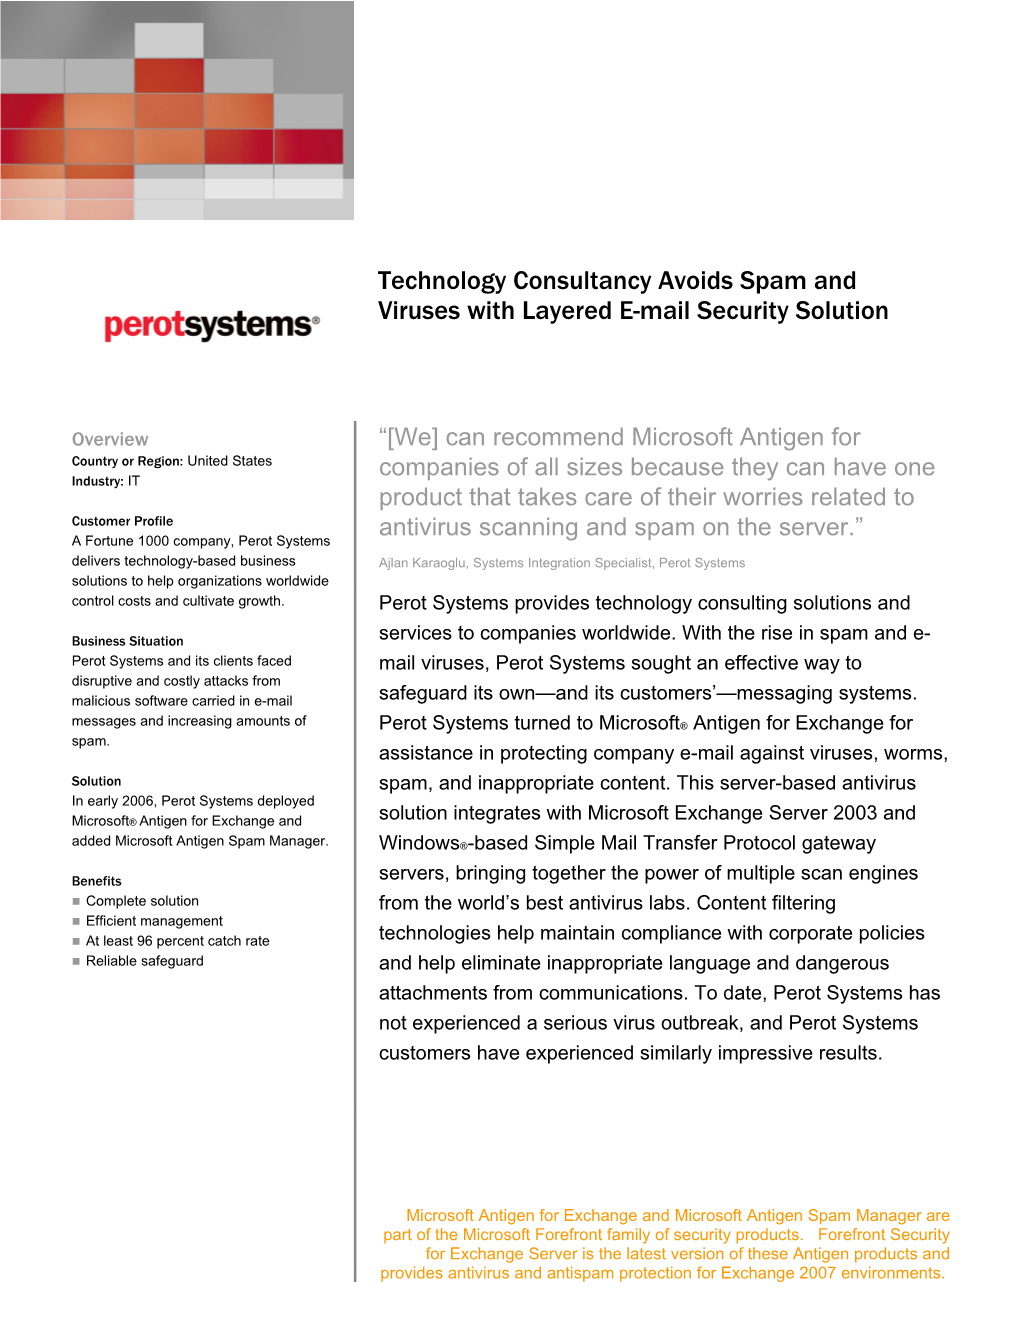 Technology Consultancy Avoids Spam and Viruses with Layered E-Mail Security Solution